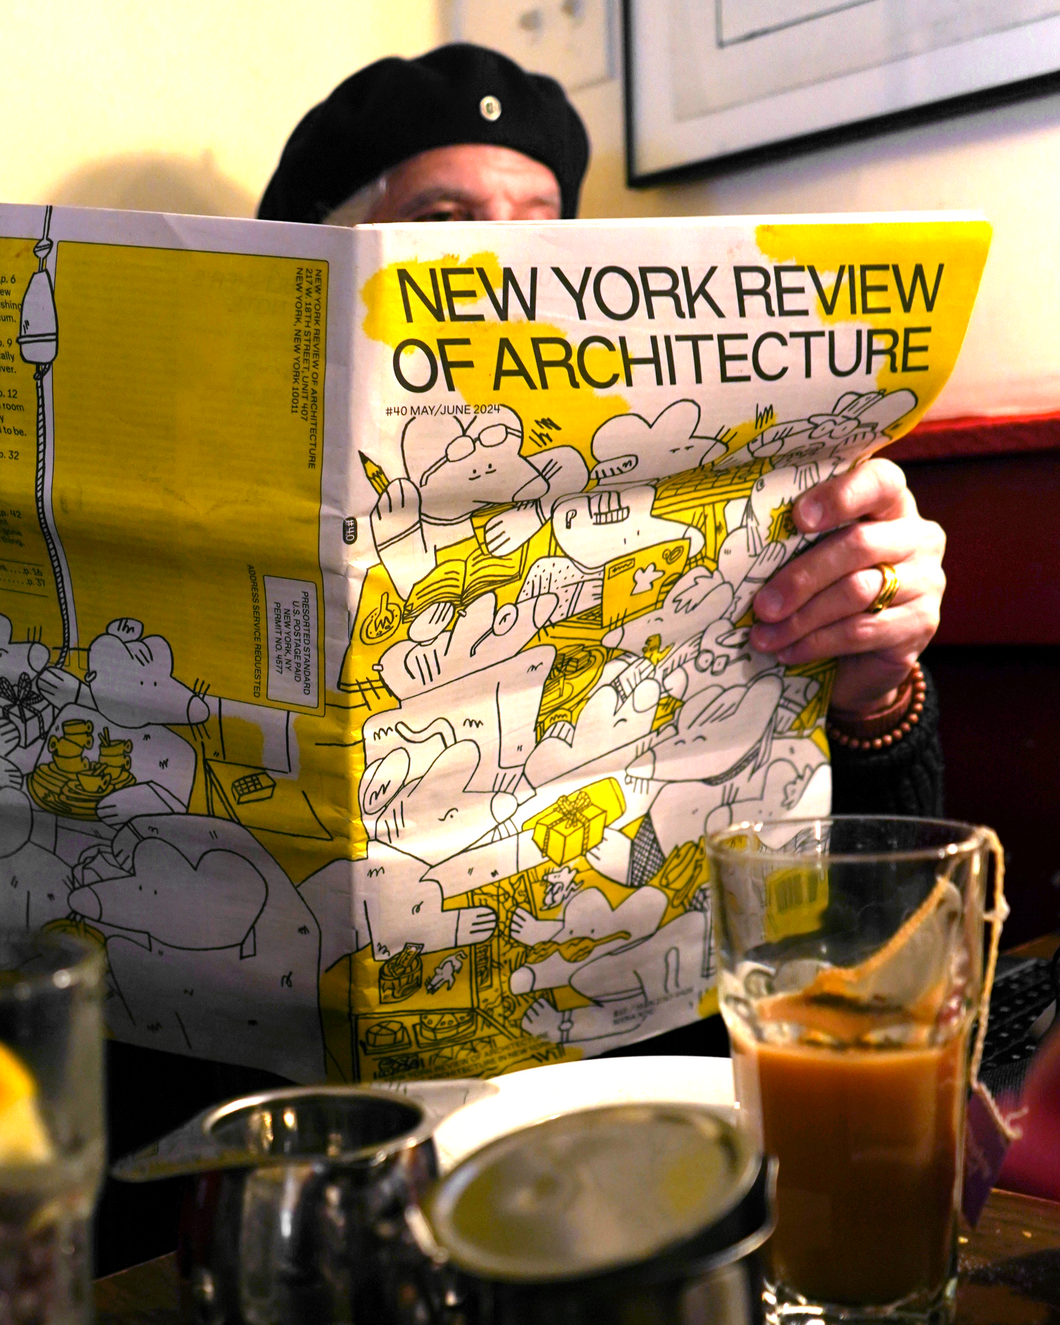 New York Review of Architecture No. 40